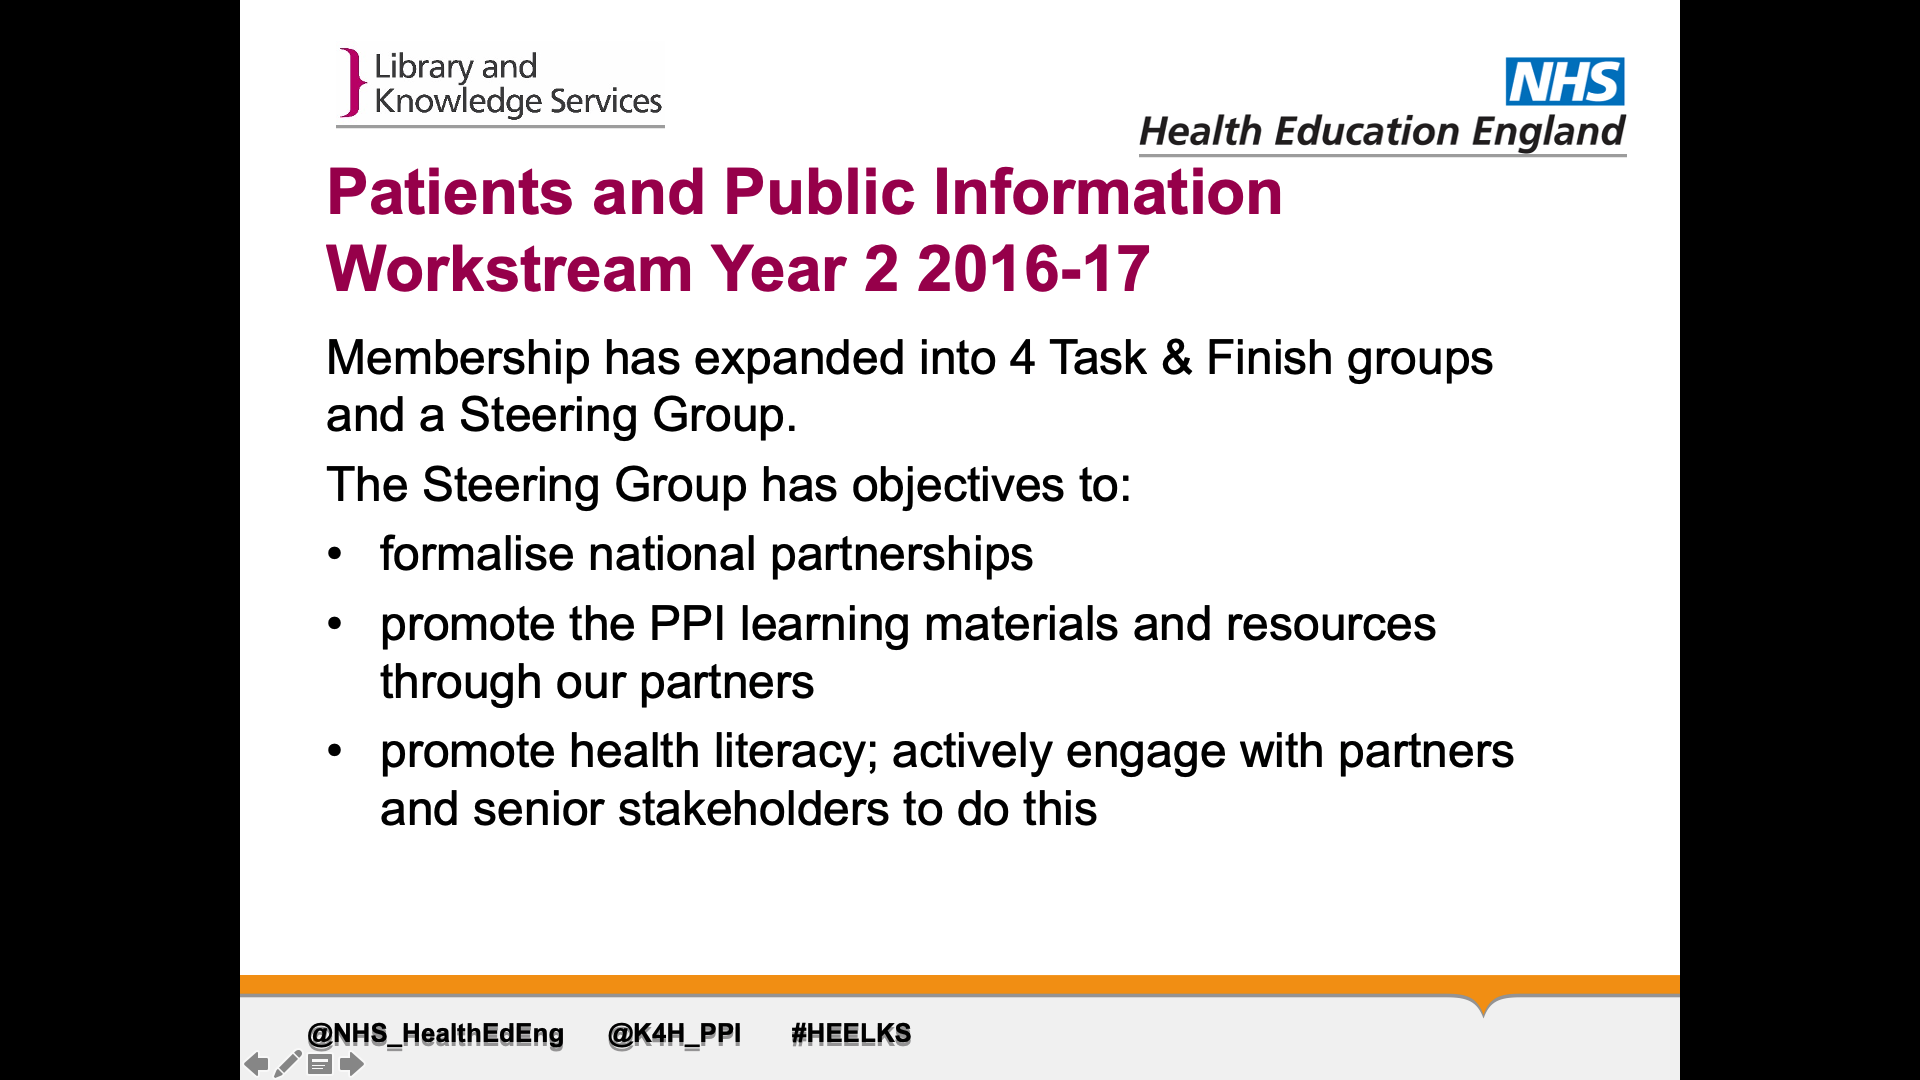 Title: Patients and Public Information Workstream Year 2 2016-17. Text on page: Membership has expanded into 4 Task & Finish groups and a Steering Group.  The Steering Group has objectives to: 1. formalise national partnerships 2. promote the PPI learning materials and resources through our partners 3. promote health literacy; actively engage with partners and senior stakeholders to do this